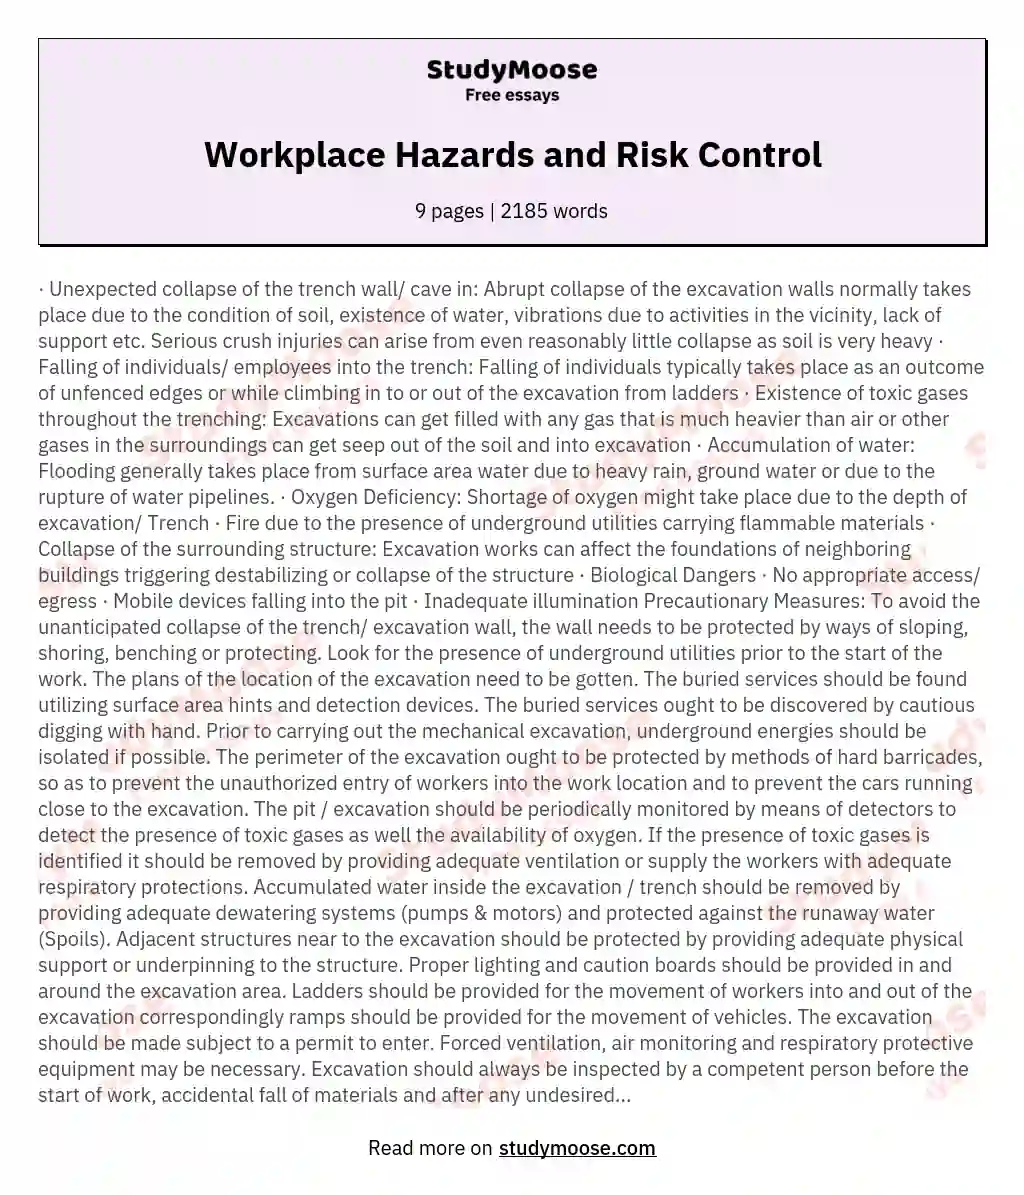 Workplace Hazards and Risk Control essay